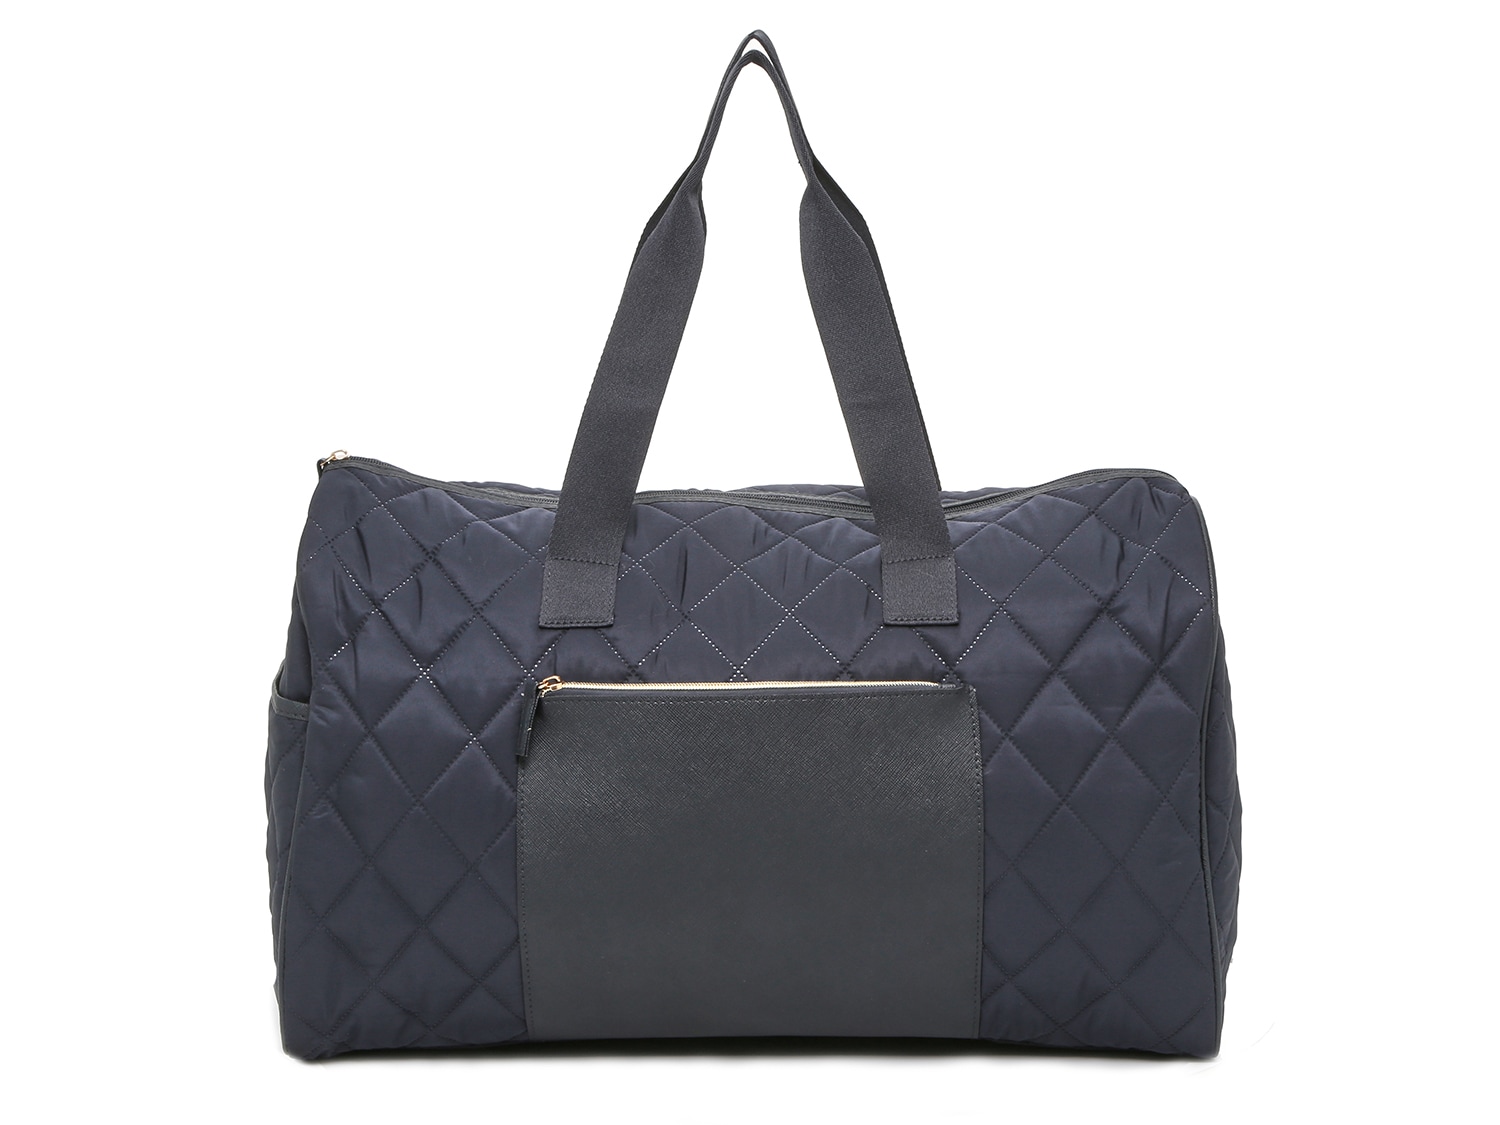 DSW Exclusive Free Quilted Weekender Bag Free Shipping DSW